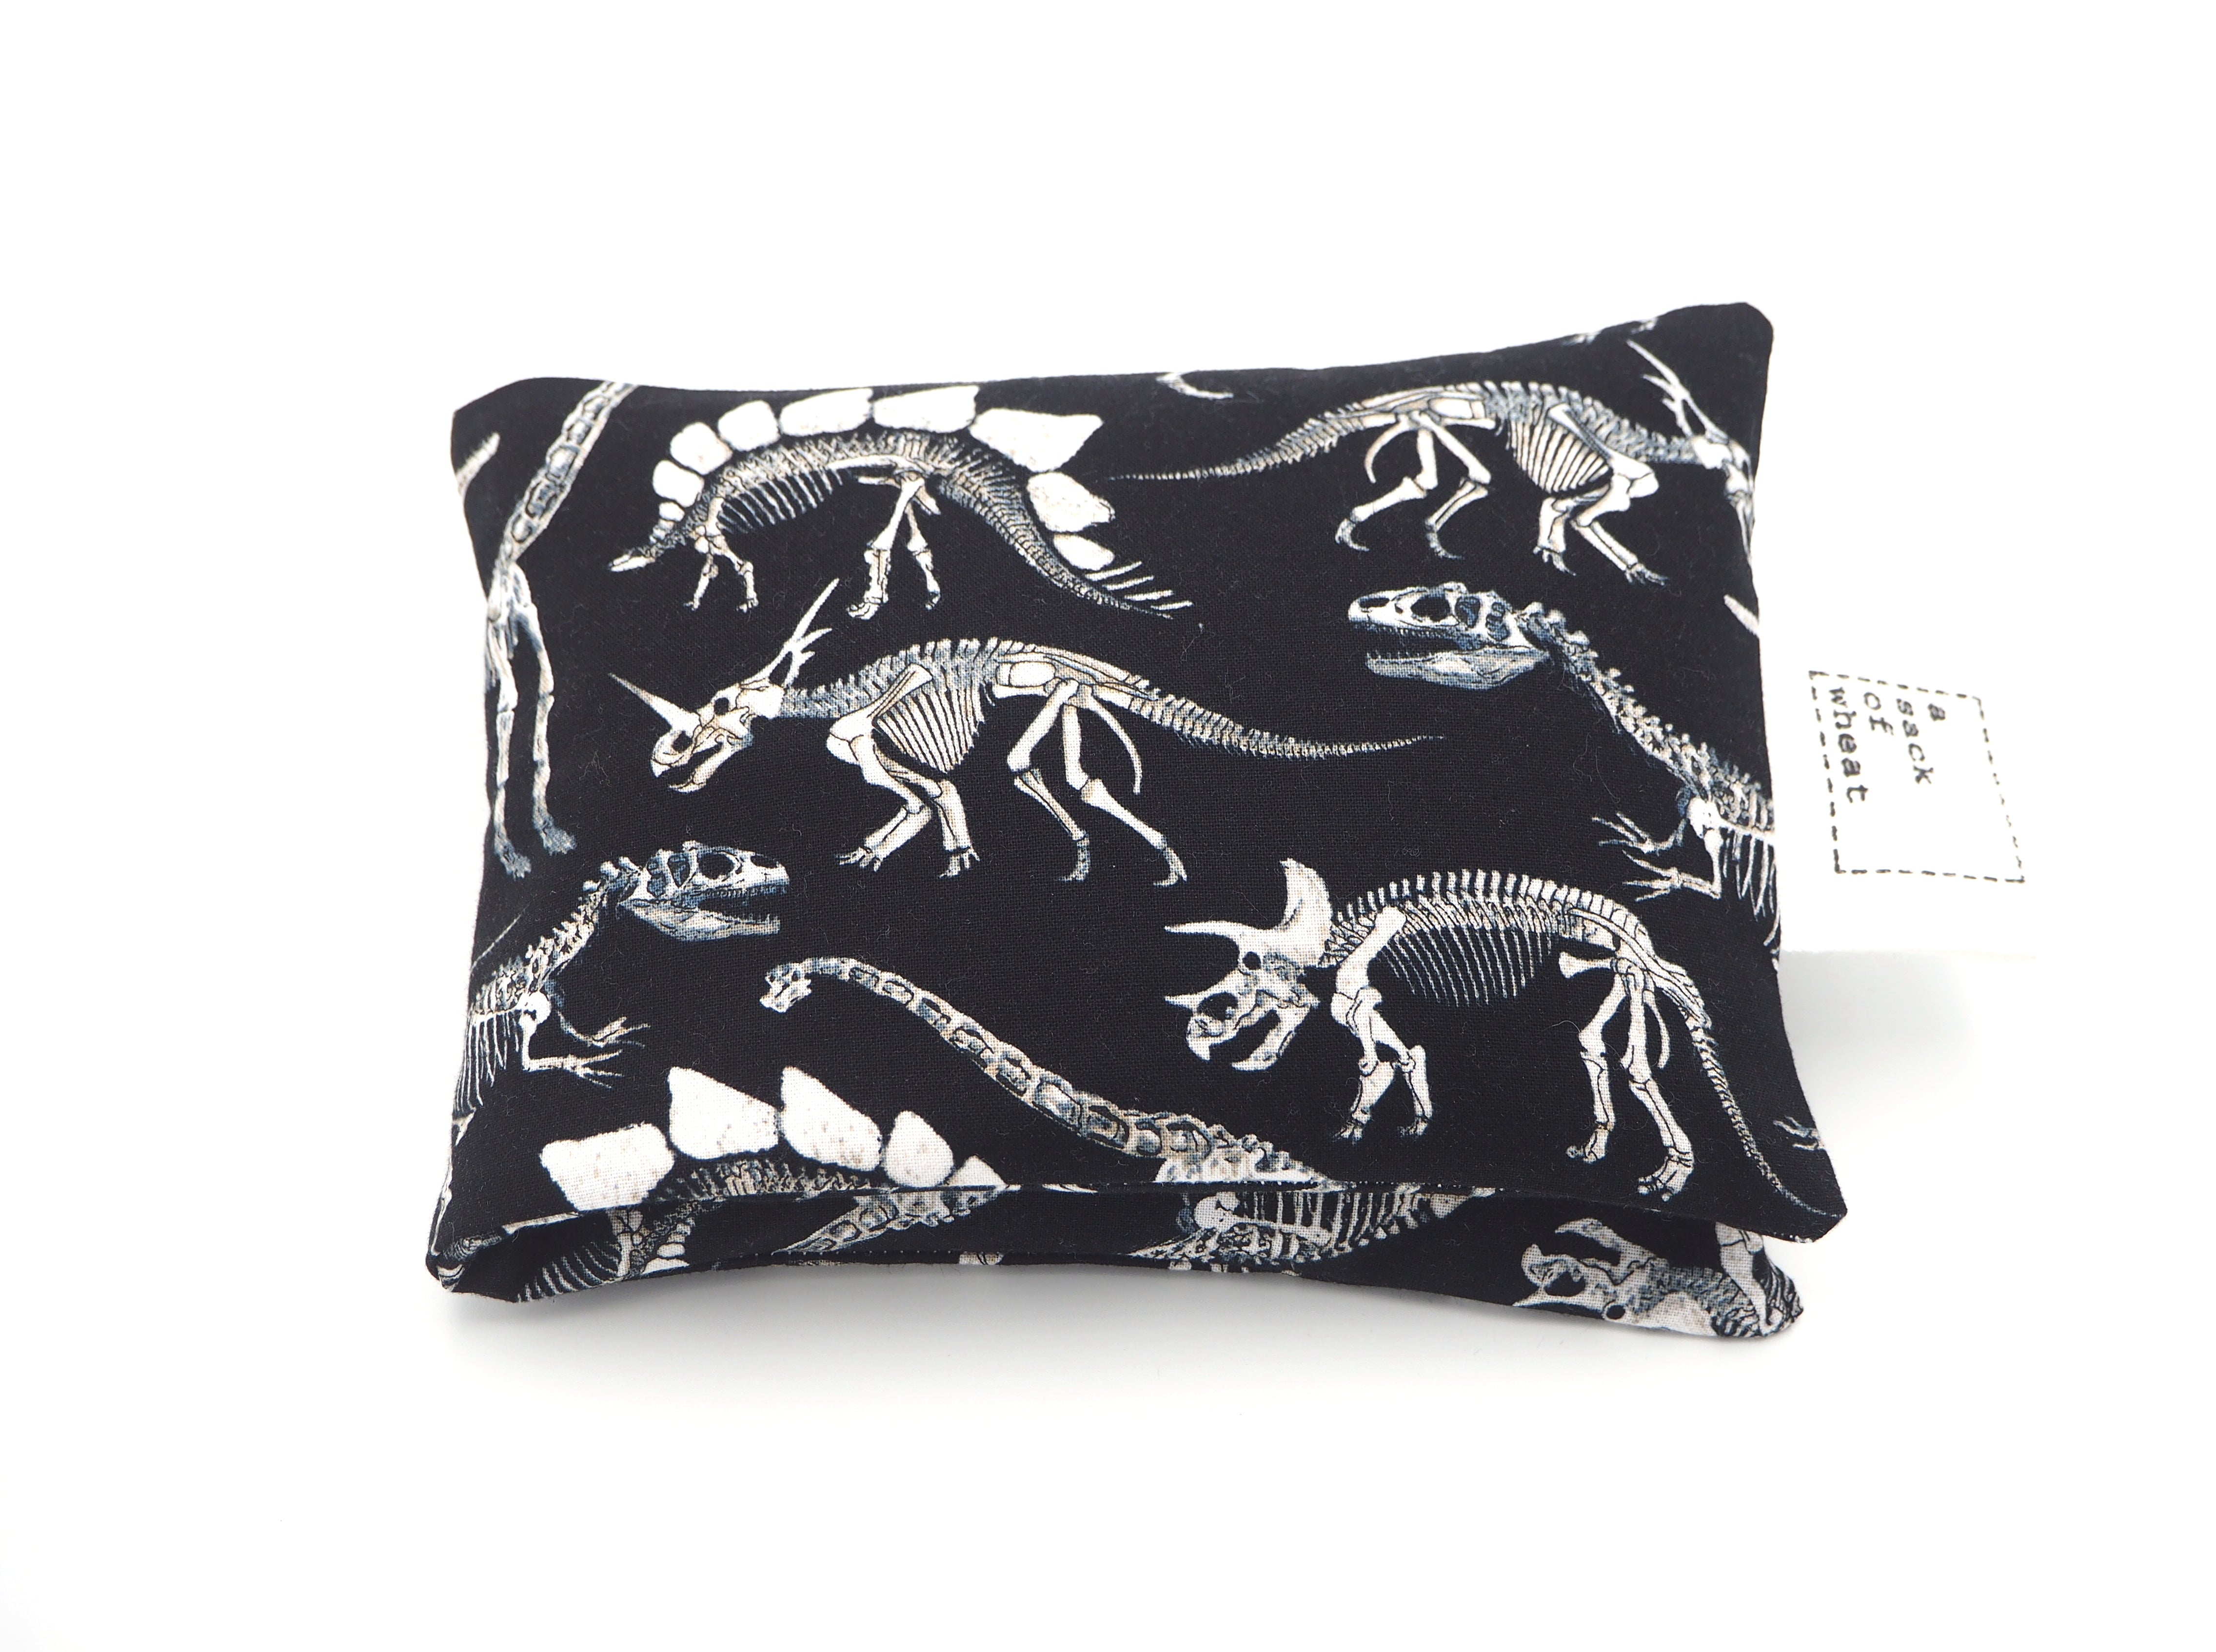 Folded view of A Sack Of Wheat, featuring black & white images of dinosaur skeletons on 100% cotton fabric